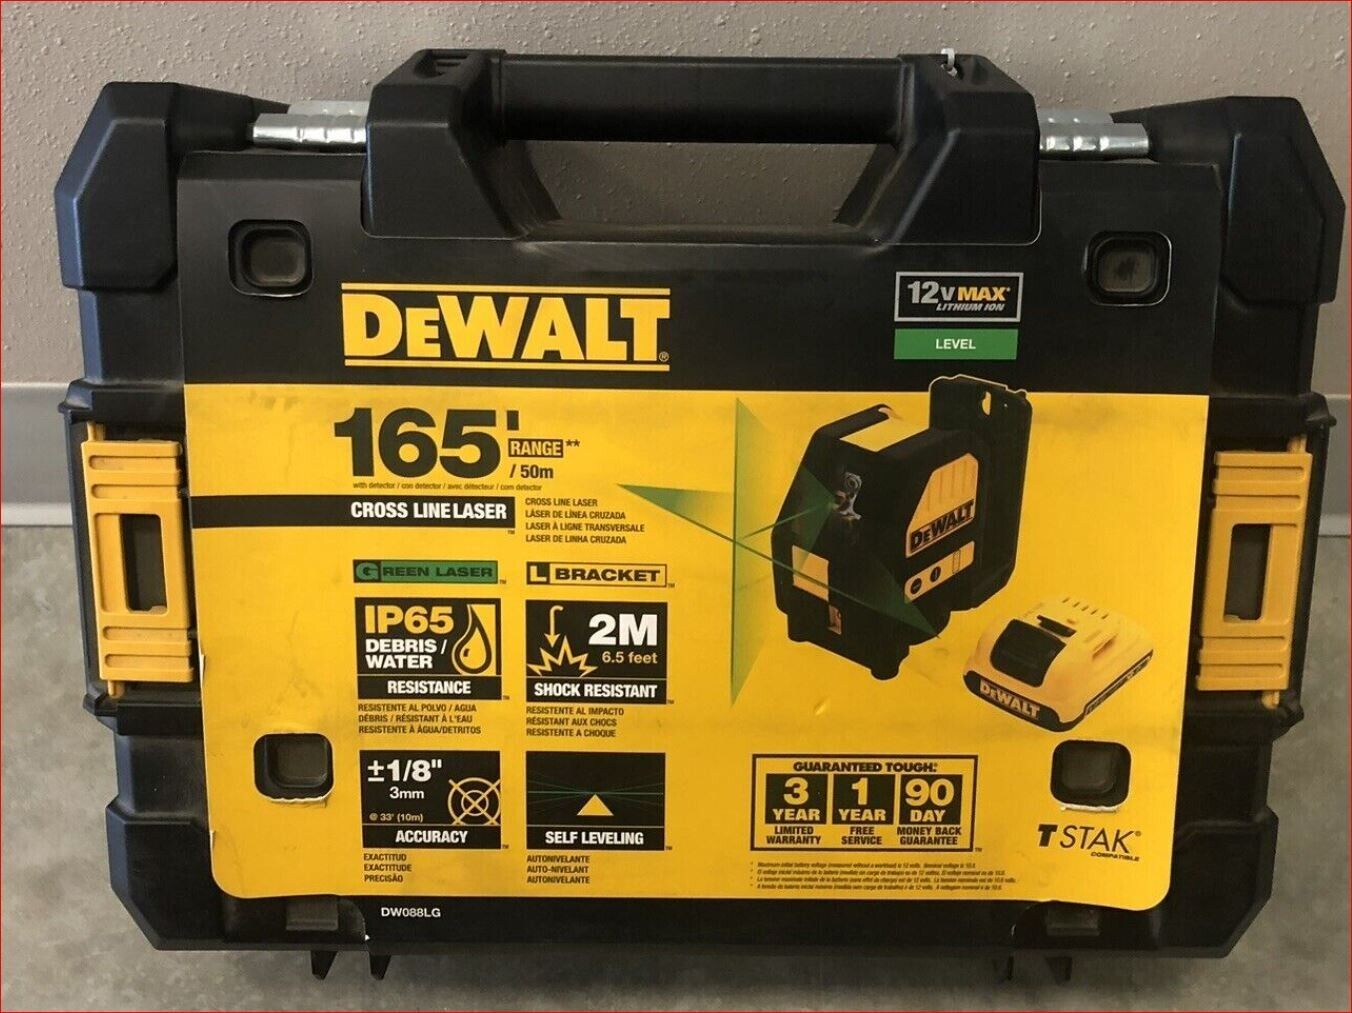 What Comes With Dewalt Laser Level 165 Ft. Box